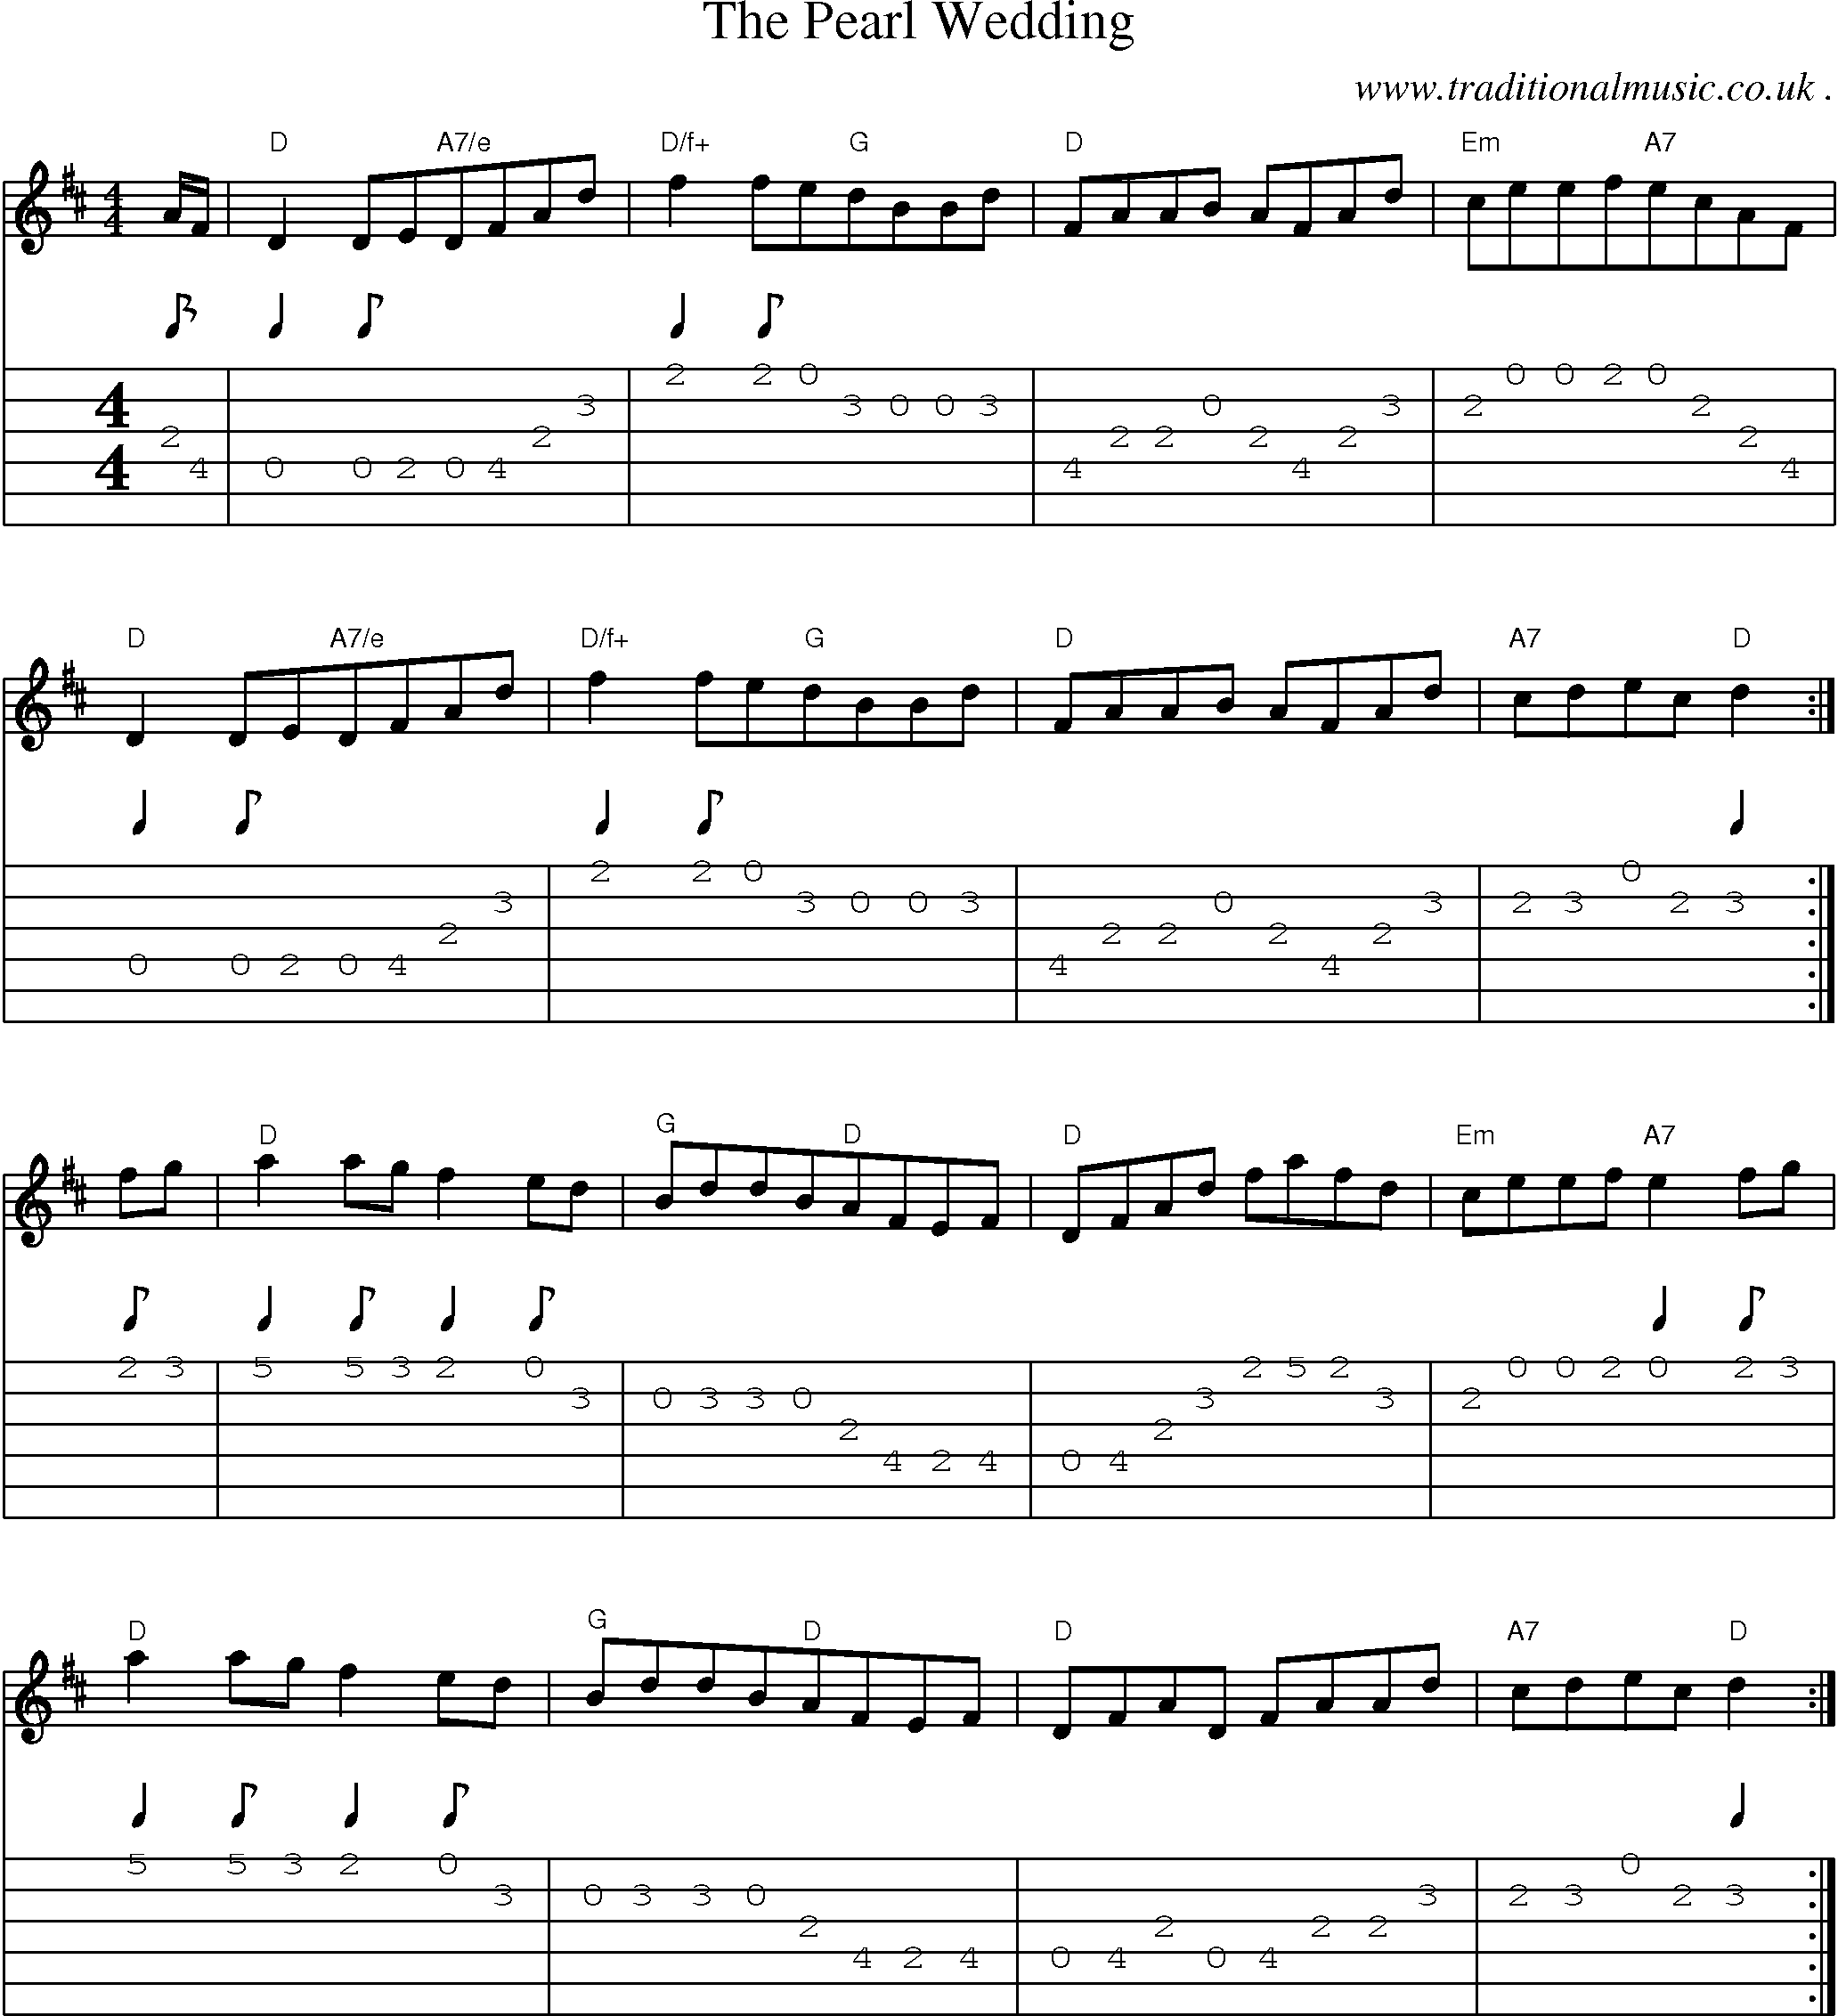 Sheet-Music and Guitar Tabs for The Pearl Wedding